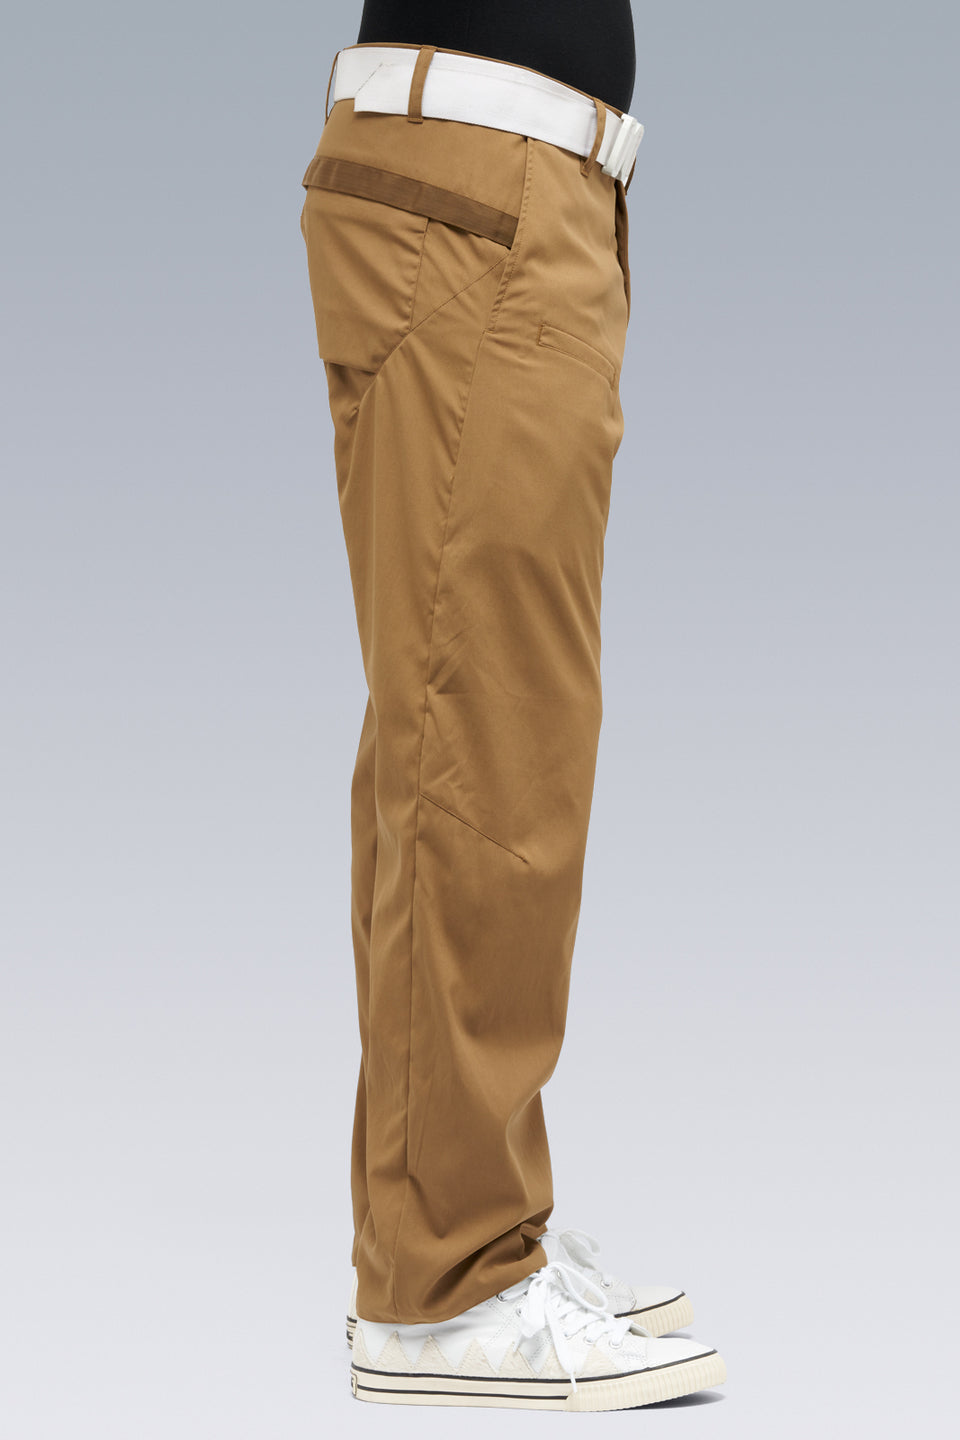 ACRONYM "P39-M Milliken Real Military Strong Fabric Military Pants"(COYOTE)